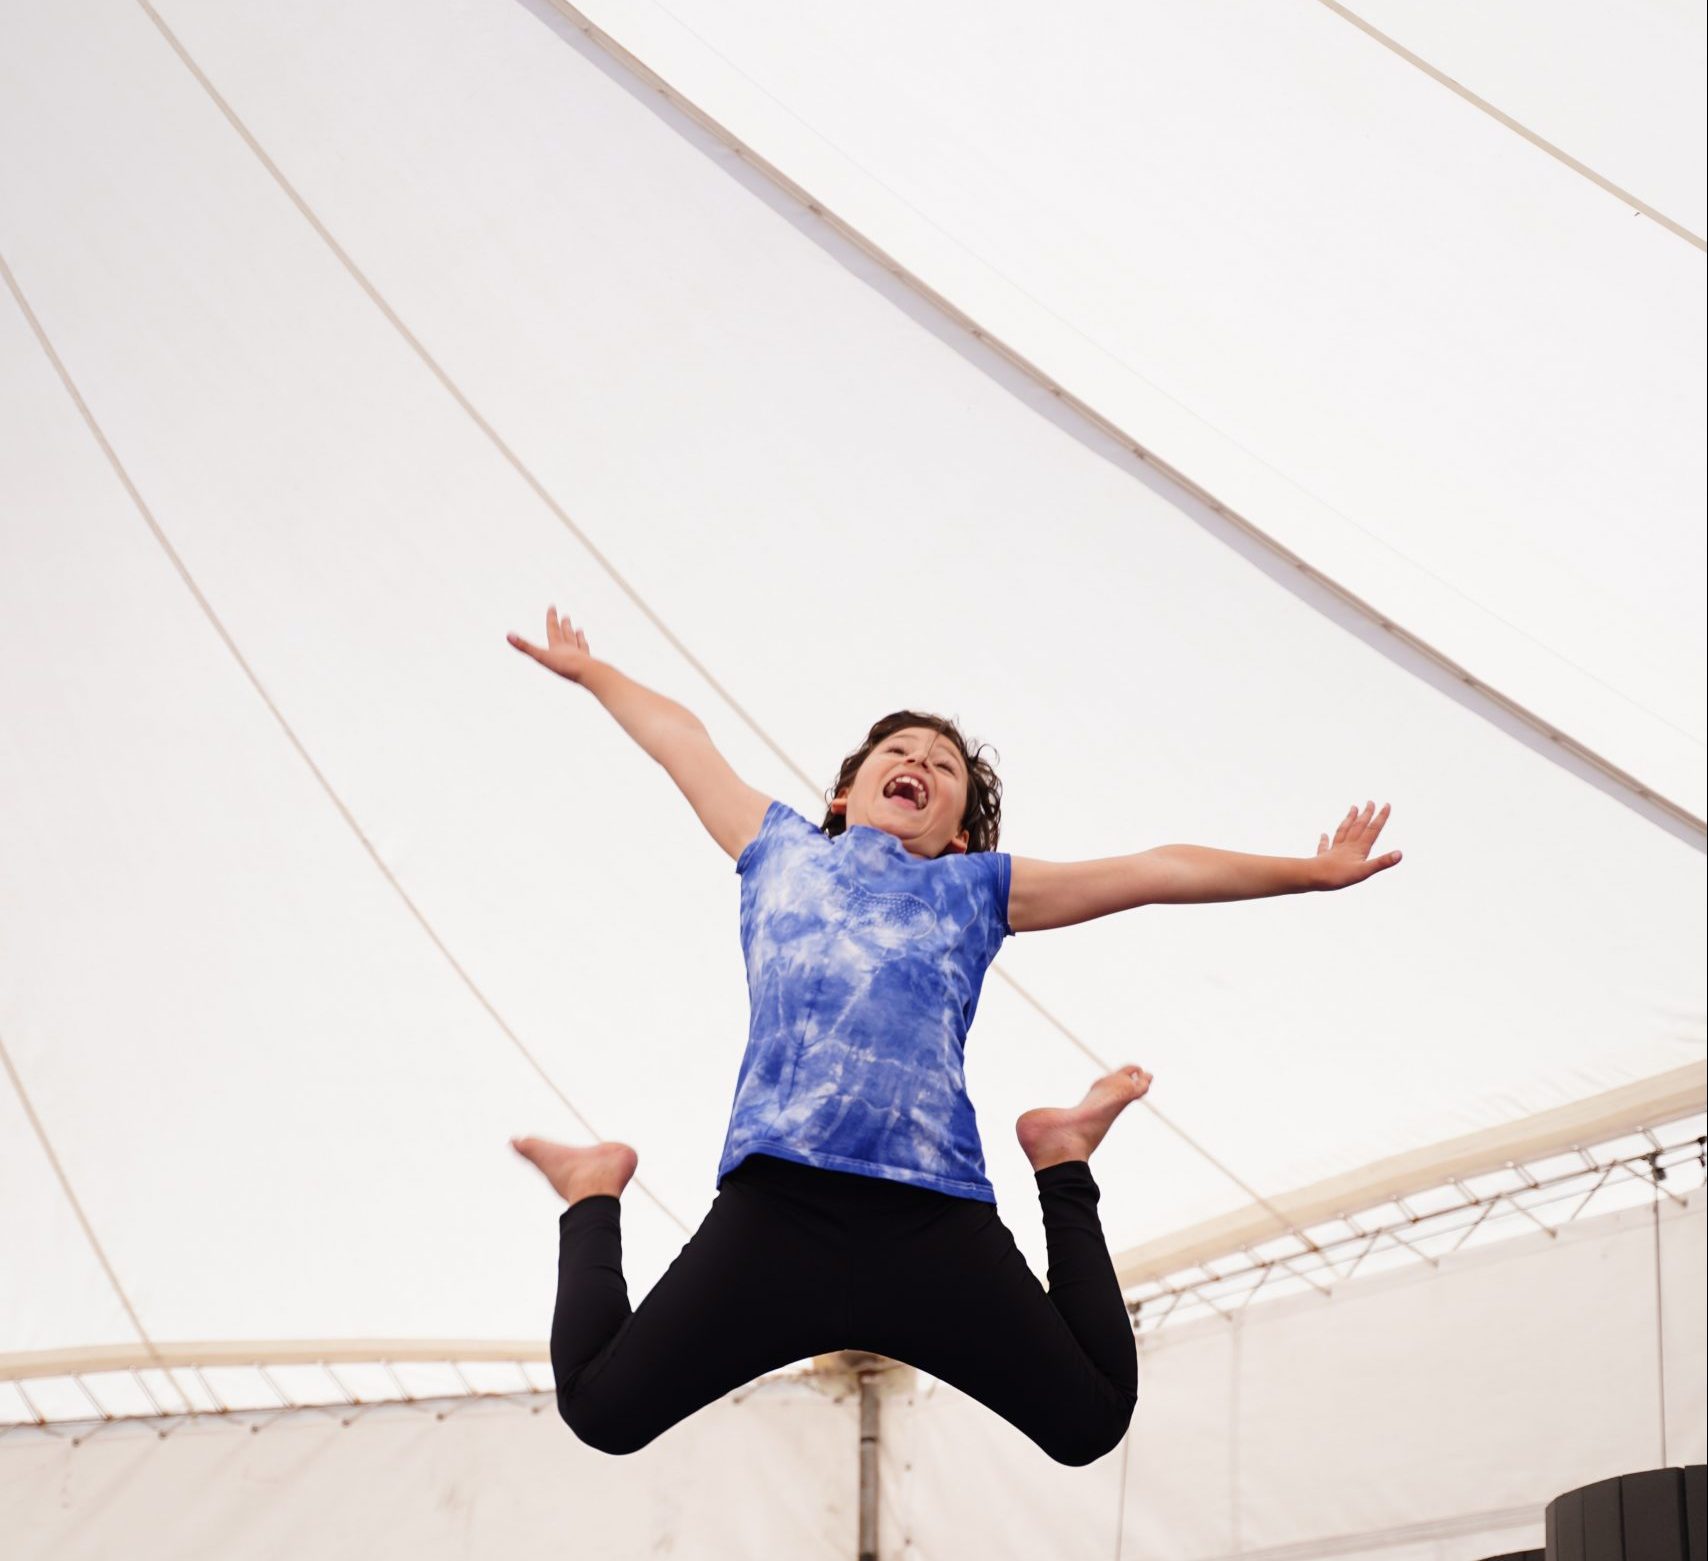 A child jumps exuberantly in the air